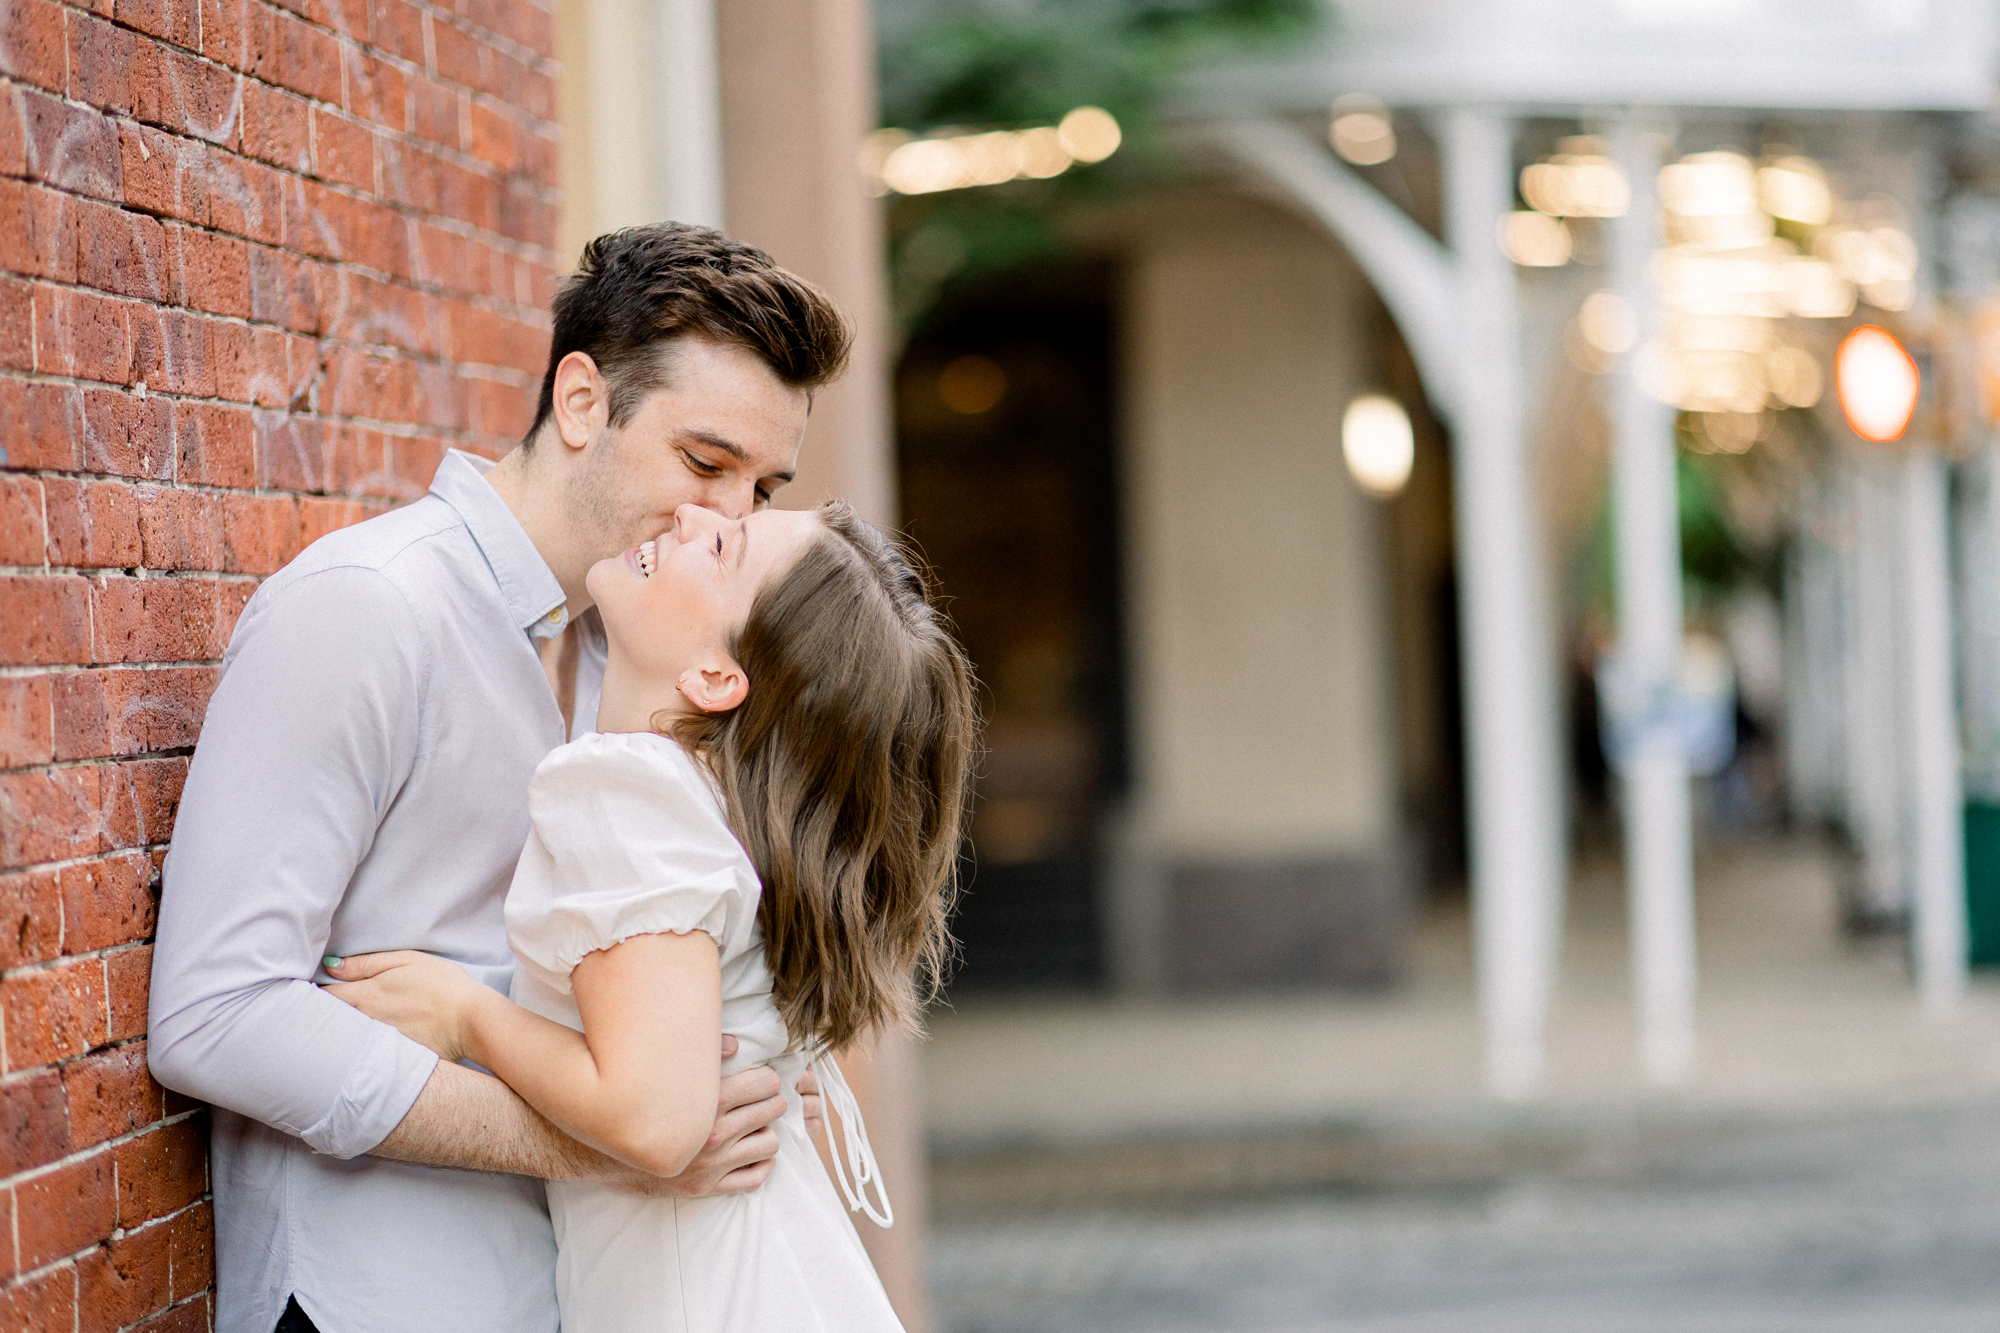 Playful Engagement Photos in Scenic Soho New York